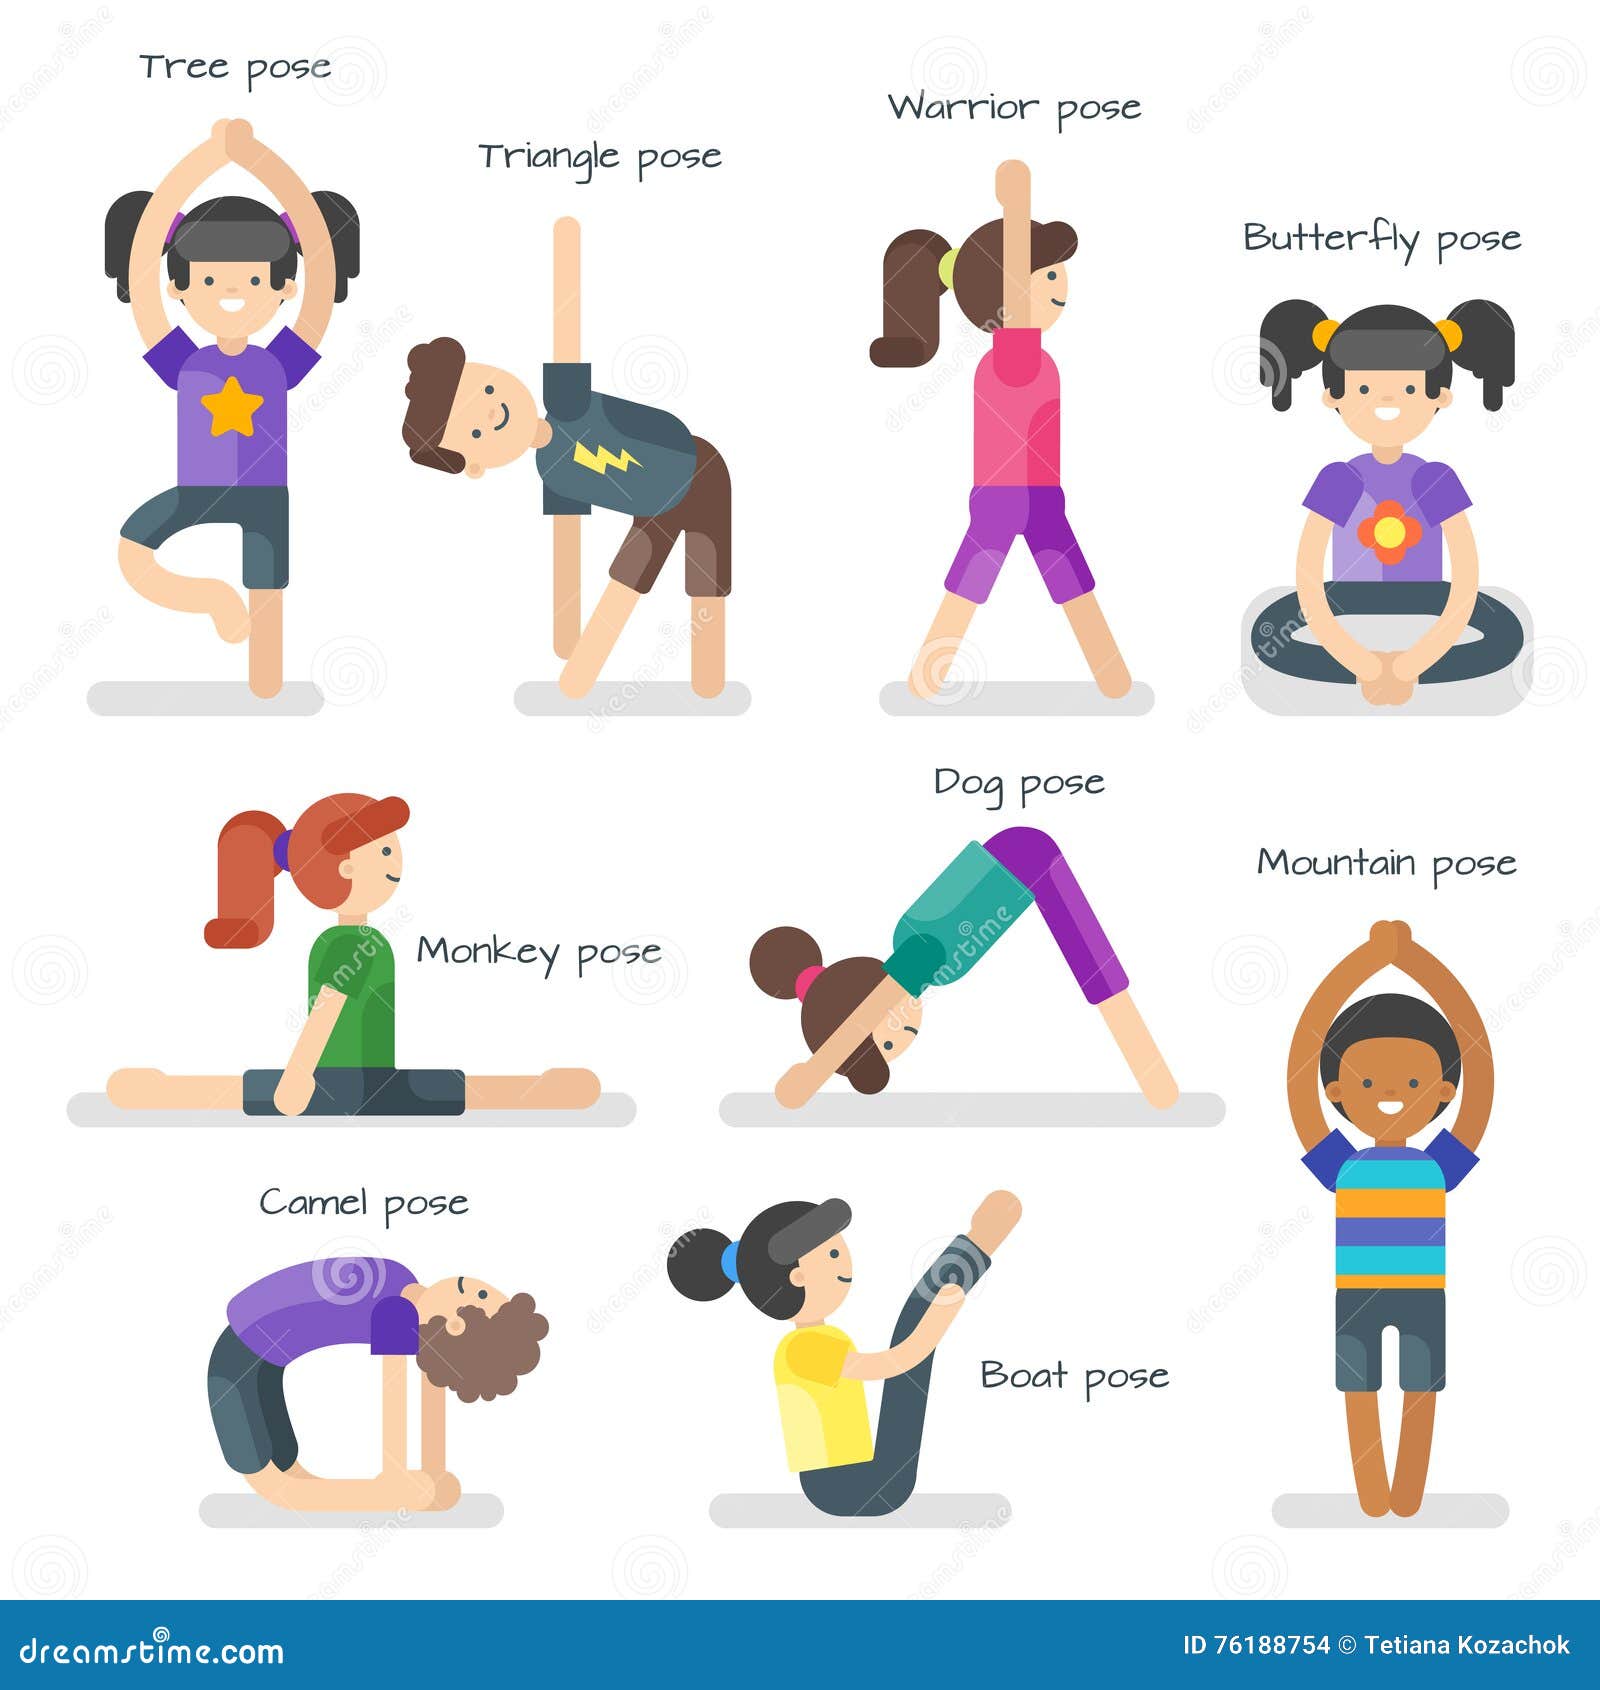 Top 4 Yoga poses for women and its health benefits